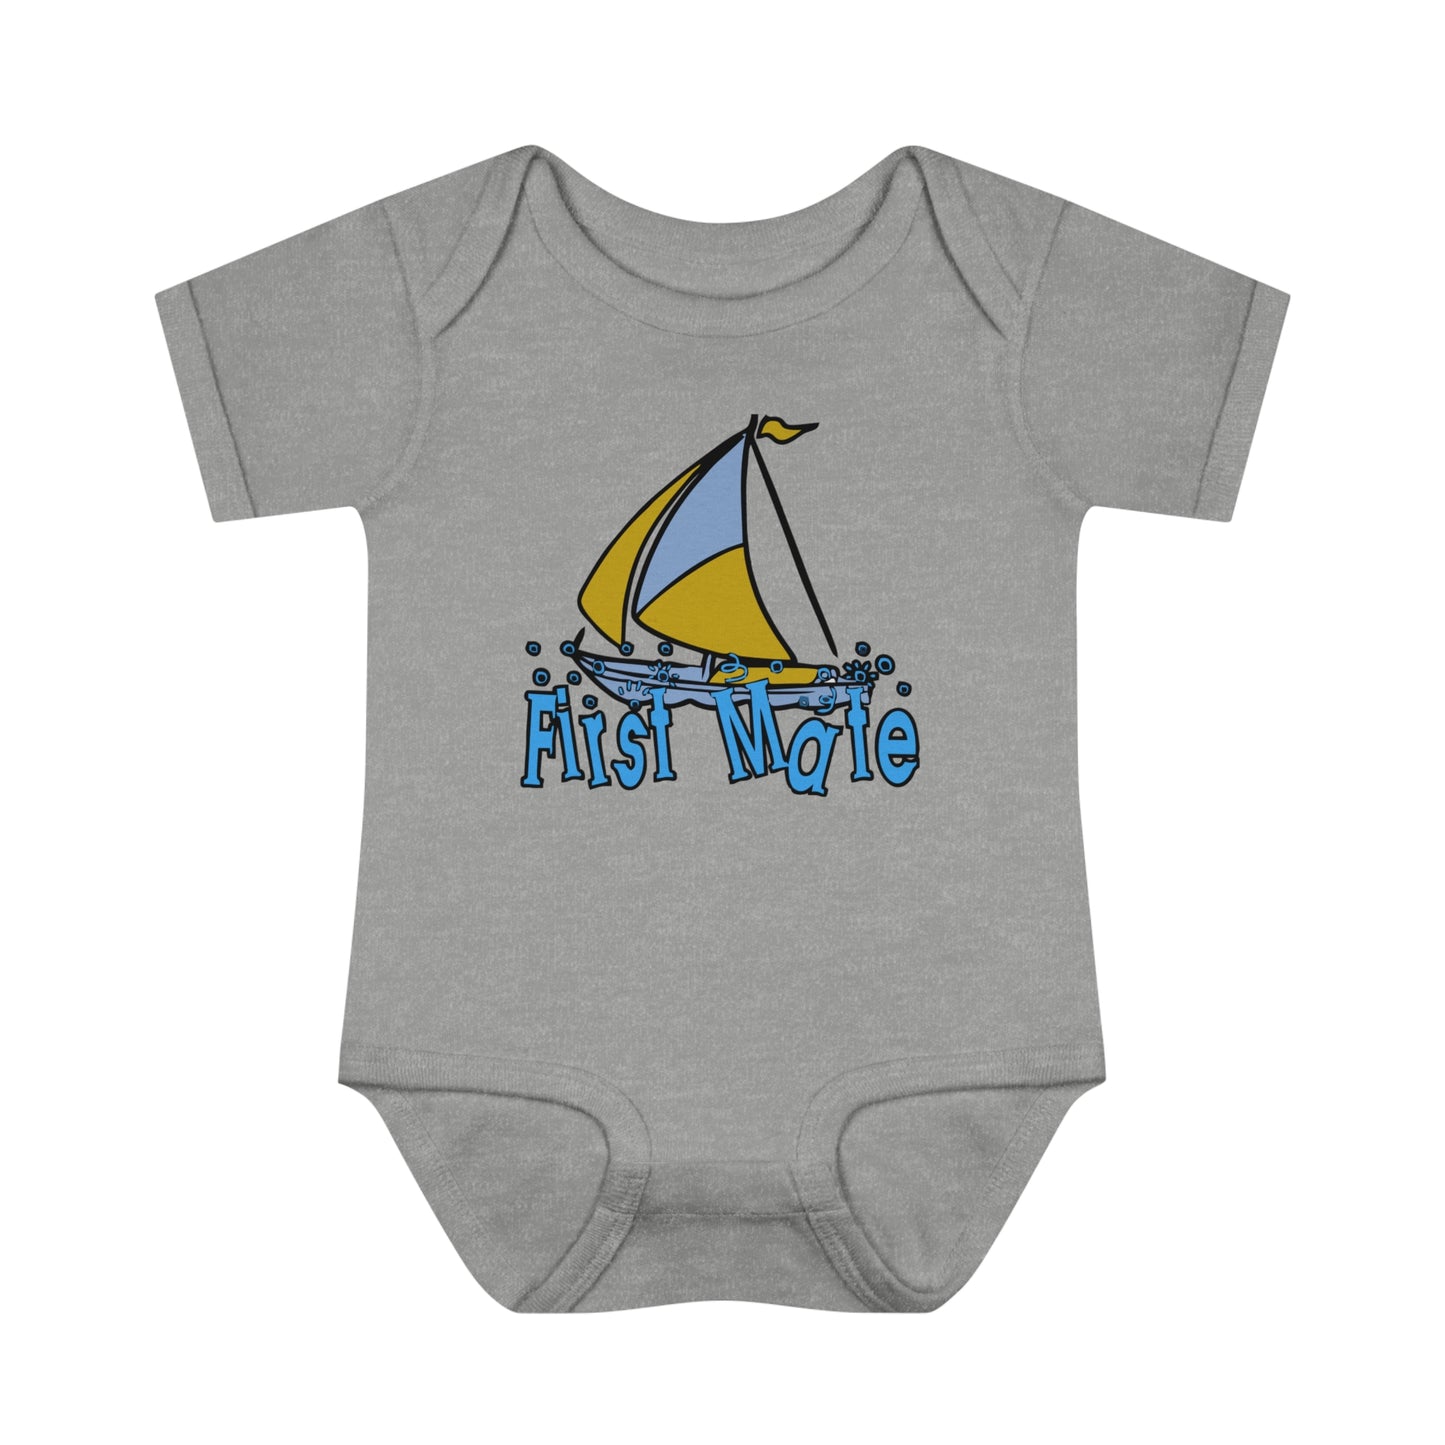 First Mate Infant T-shirt, Baby one-piece Sailor t-shirt, Sailboat Design, Baby Future, Sailor, Gift for Sailing Enthusiasts, Shower Gift